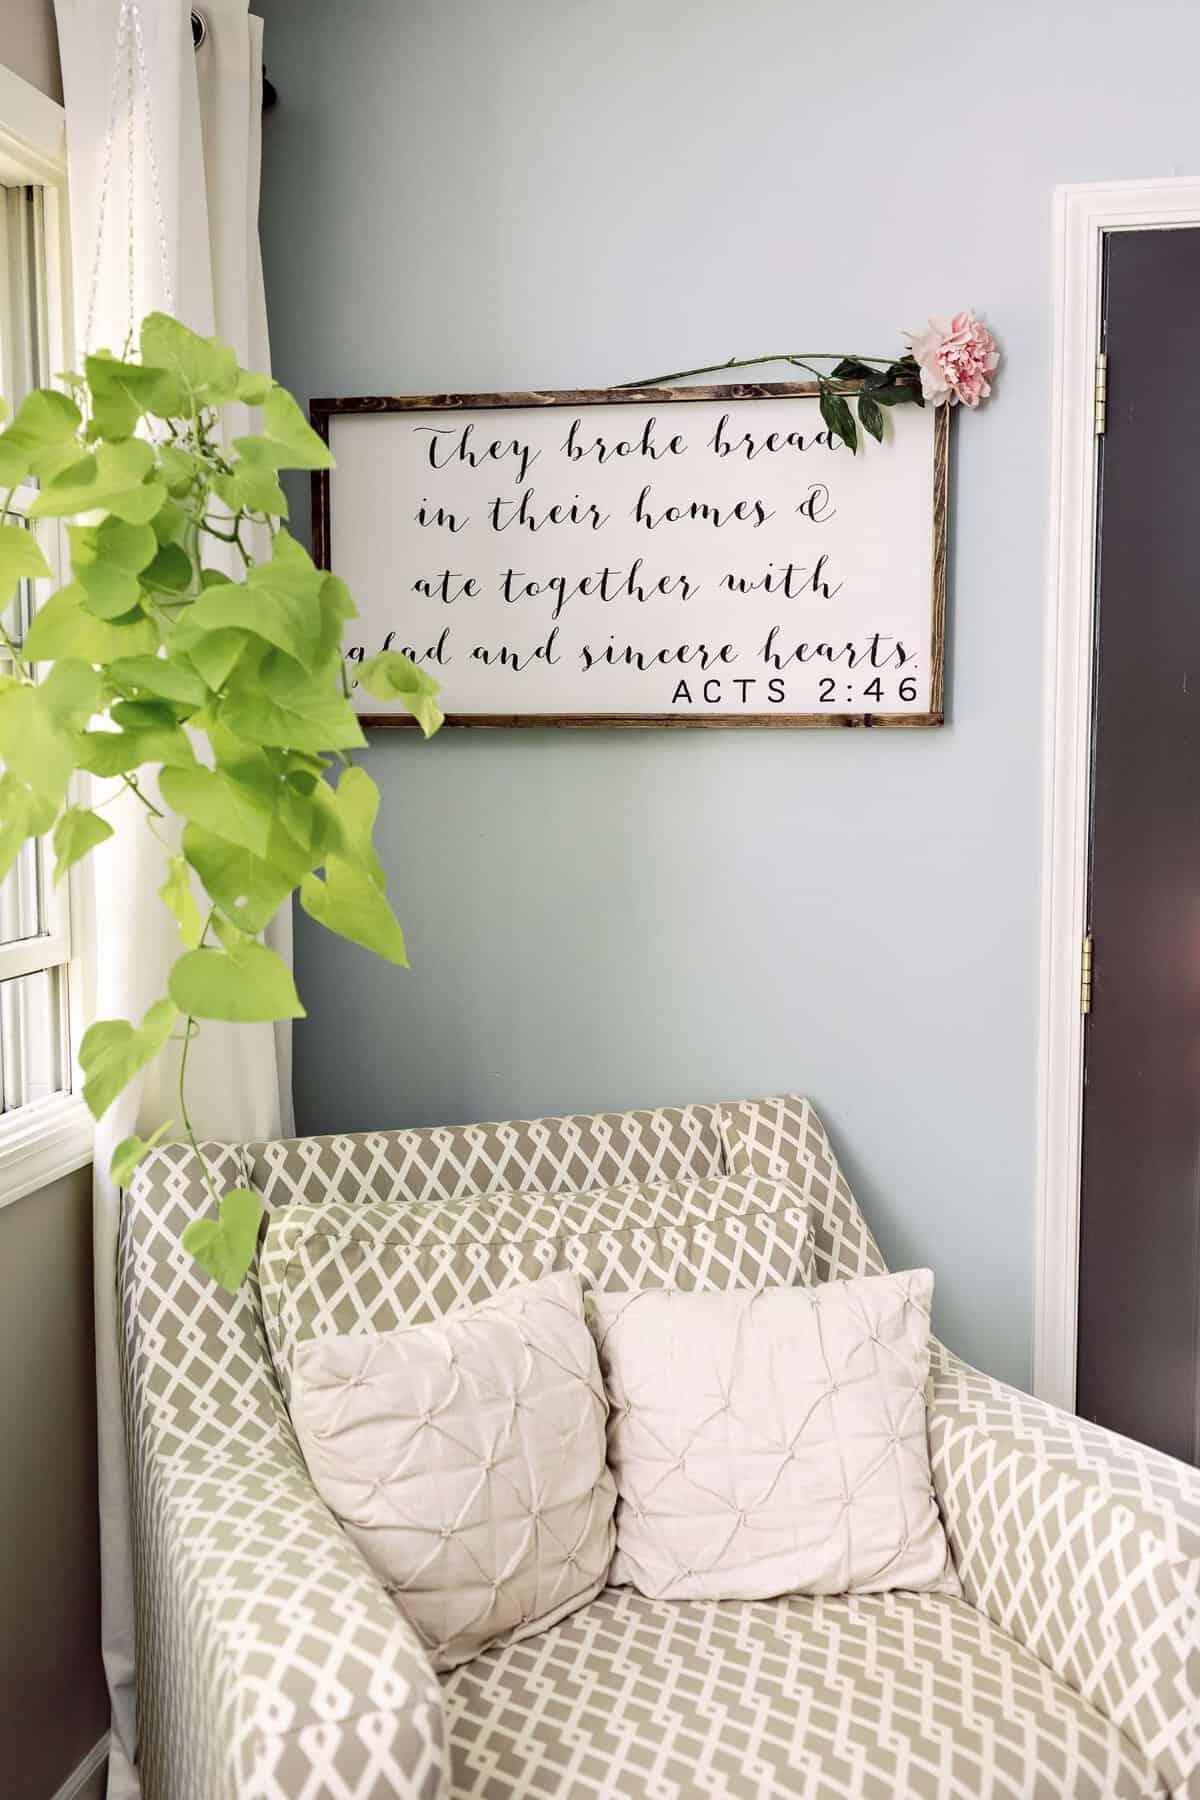 Have you wondered where to get beautifully handcrafted home decor? I've rounded up my favorite sign makers, making it easy to add character to your home.